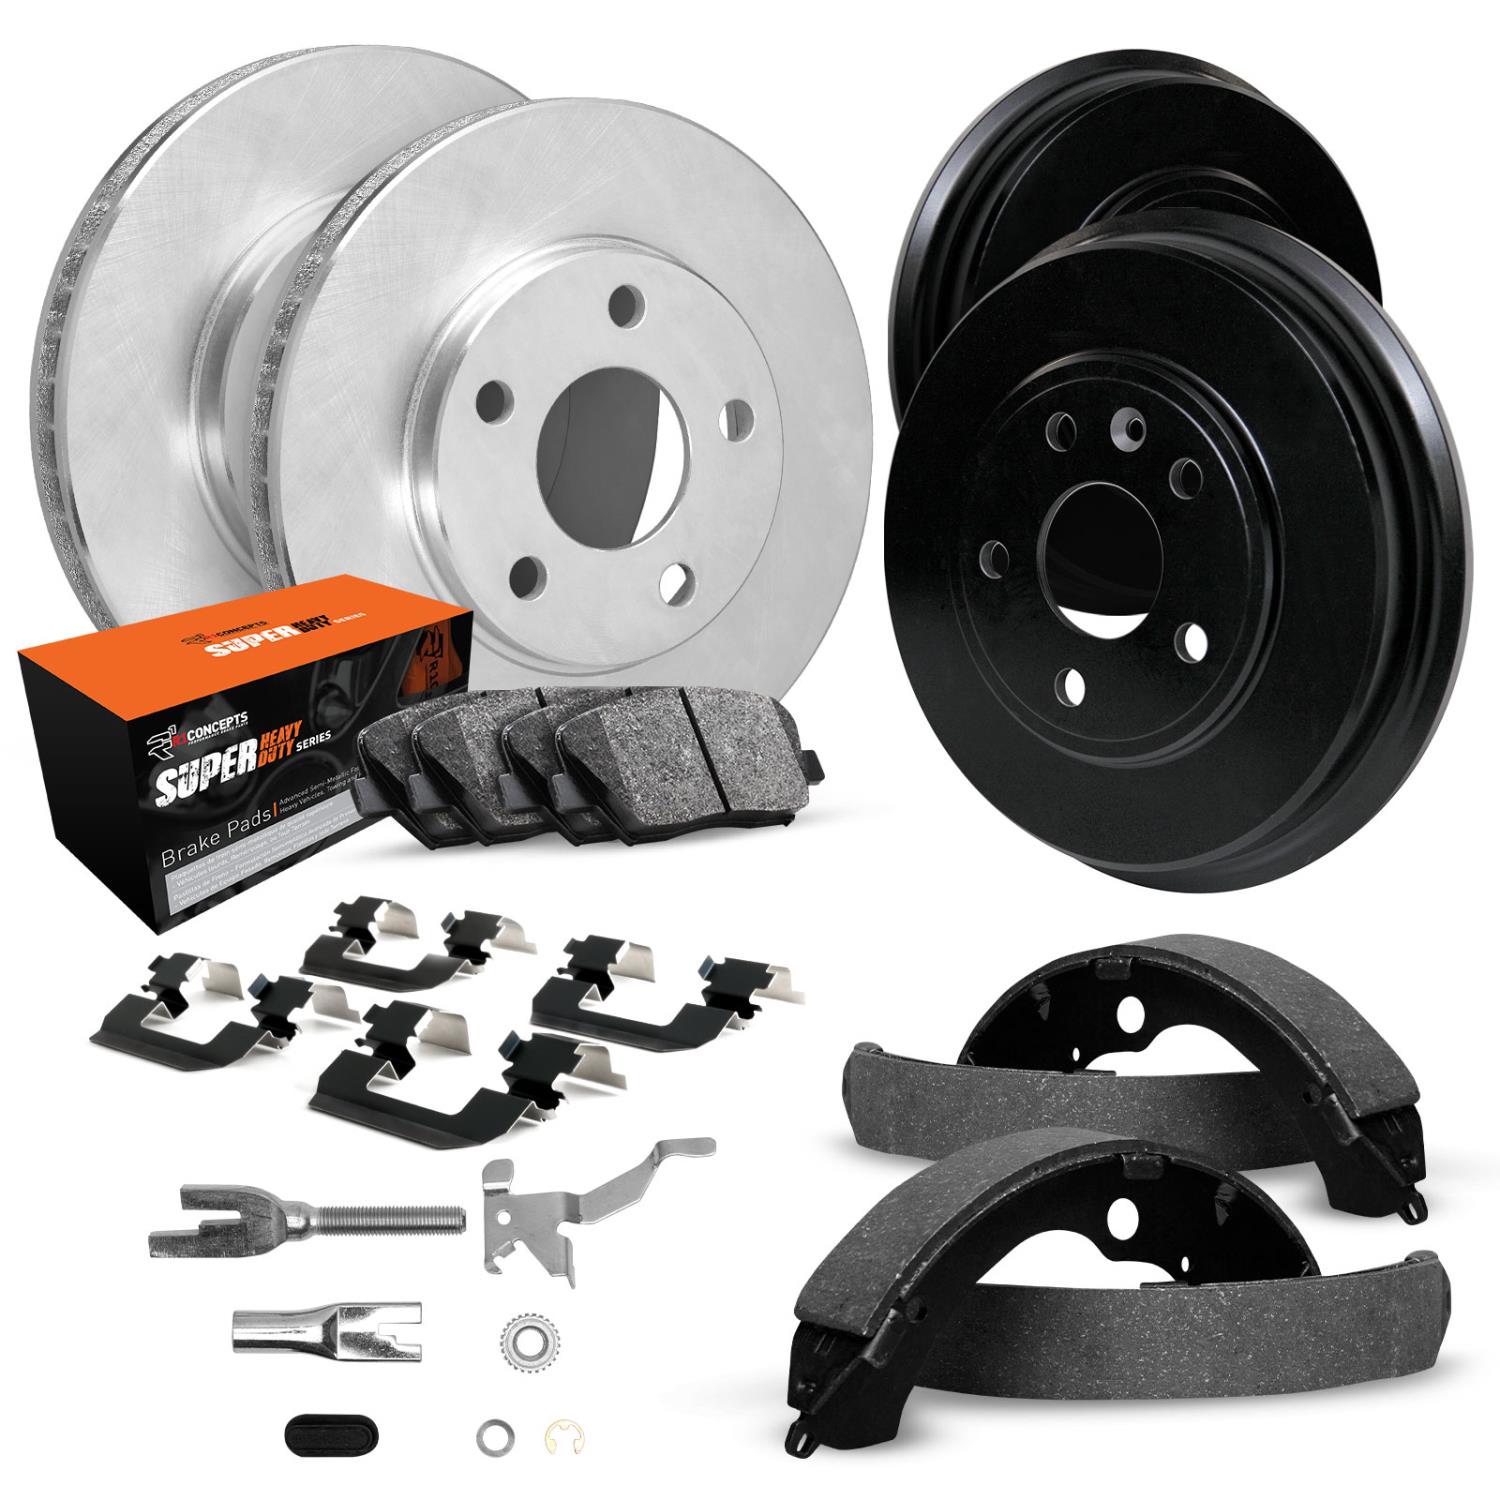 E-Line Blank Brake Rotor & Drum Set w/Super-Duty Pads, Shoes, Hardware, & Adjusters, 1973-1976 GM, Position: Front & Rear